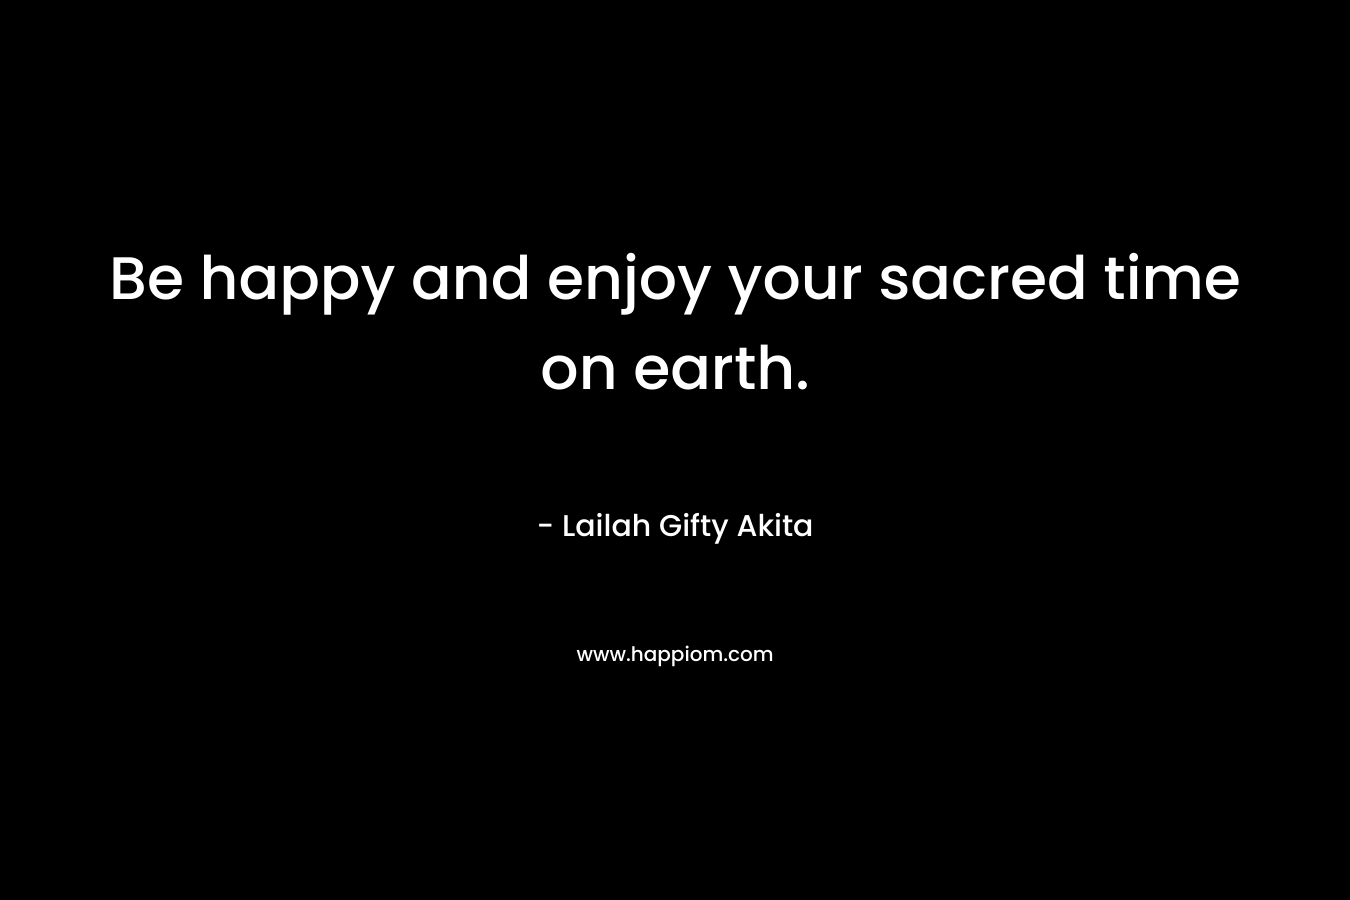 Be happy and enjoy your sacred time on earth.